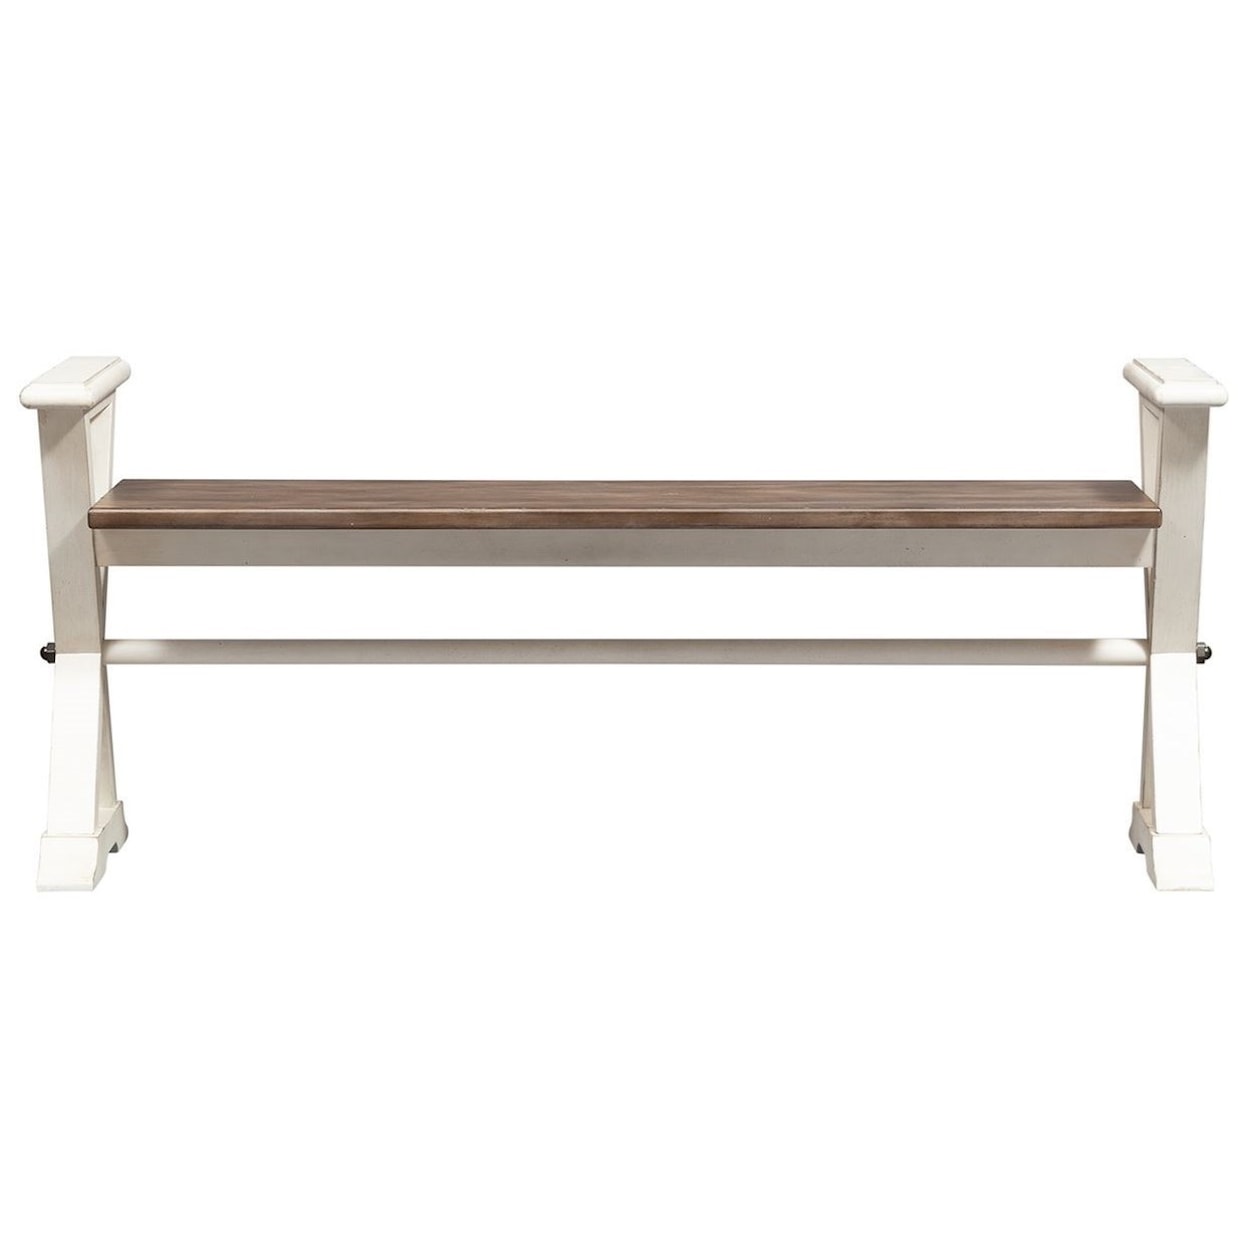 Liberty Furniture Abbey Road Bed Bench